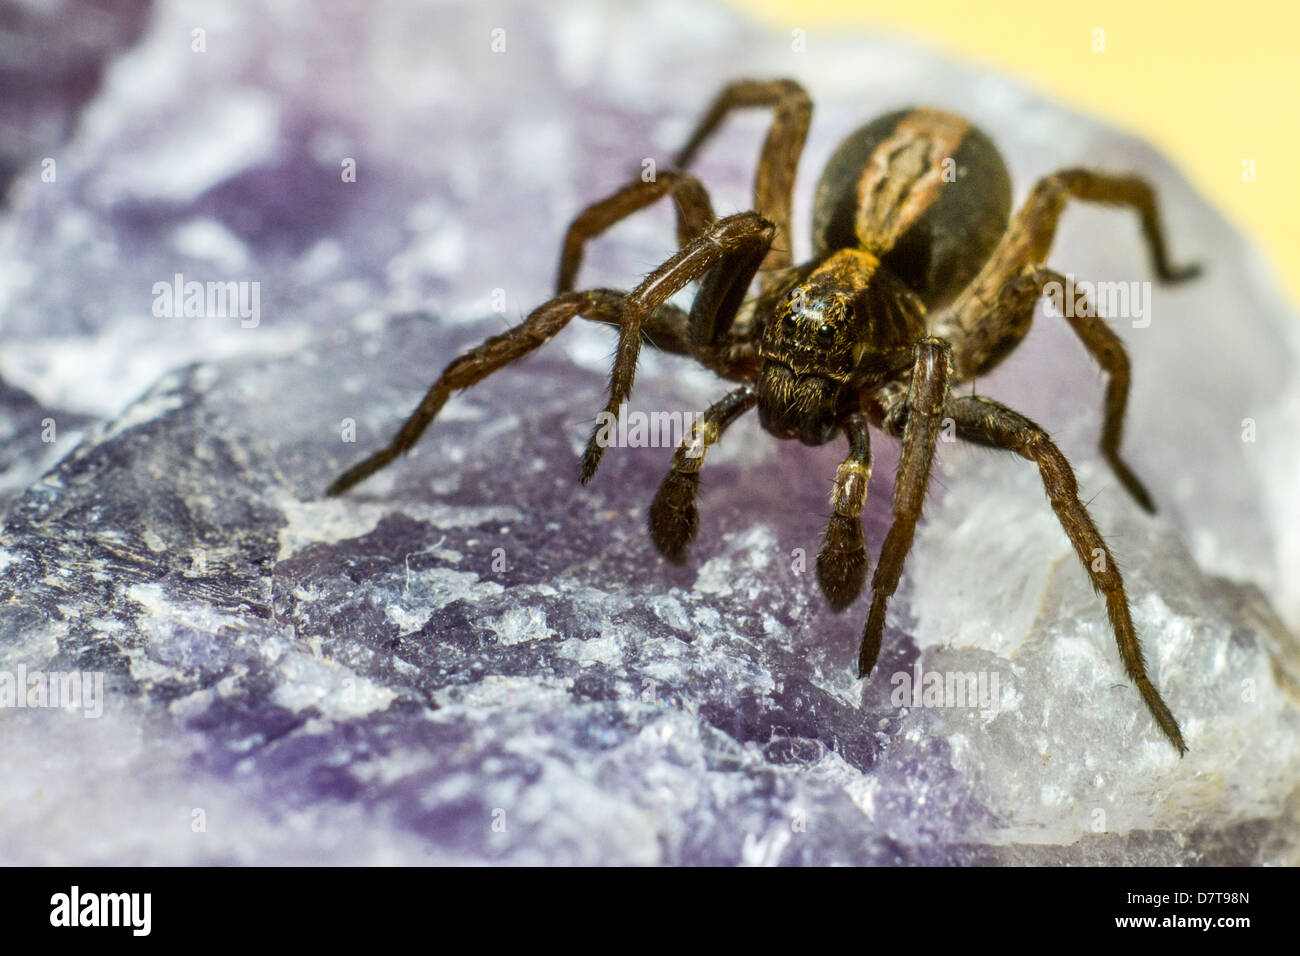 Portrait of a spider Stock Photo